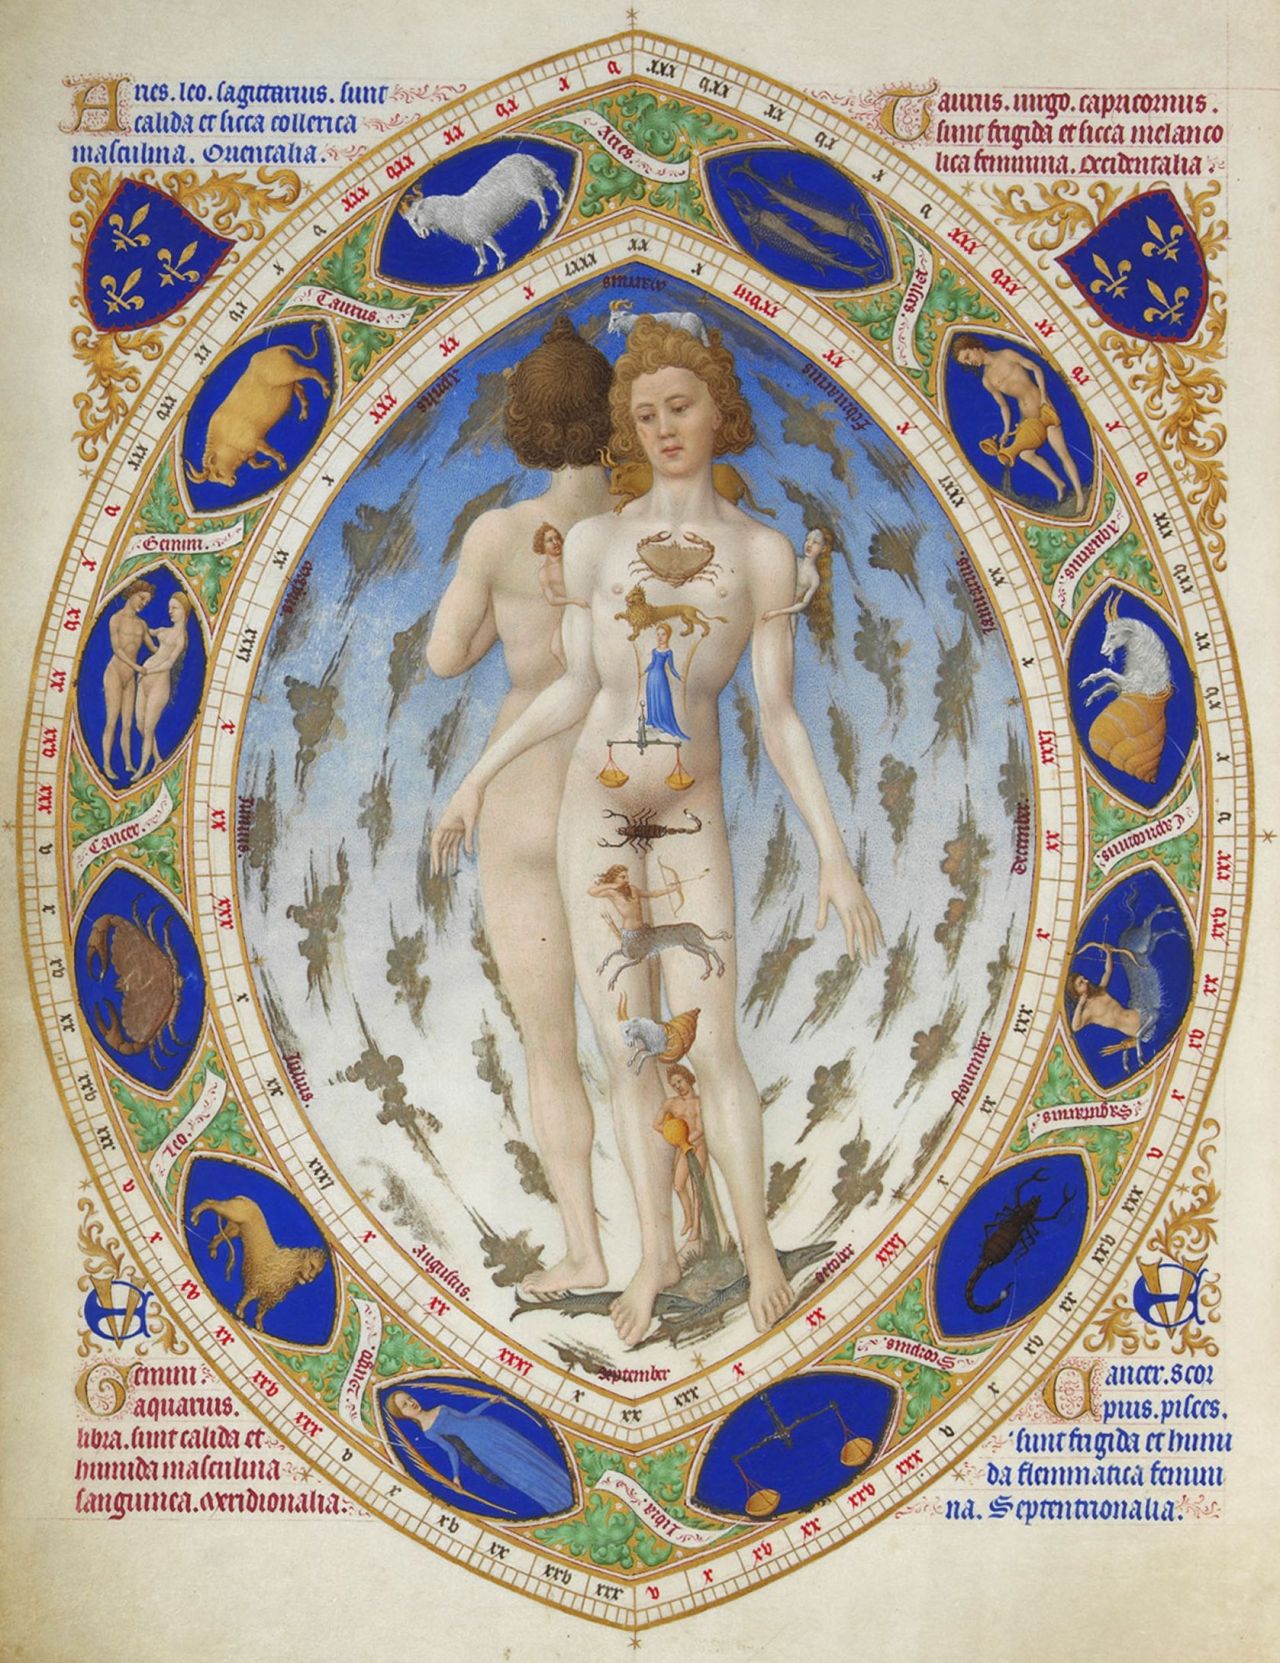 mediumaevum:
“ You probably associate Très Riches Heures du duc de Berry with the calendar pages, but it has many more stunning illustrations. Like this Anatomical man.
Each zodiac sign corresponds to a specific part of the body, starting with...